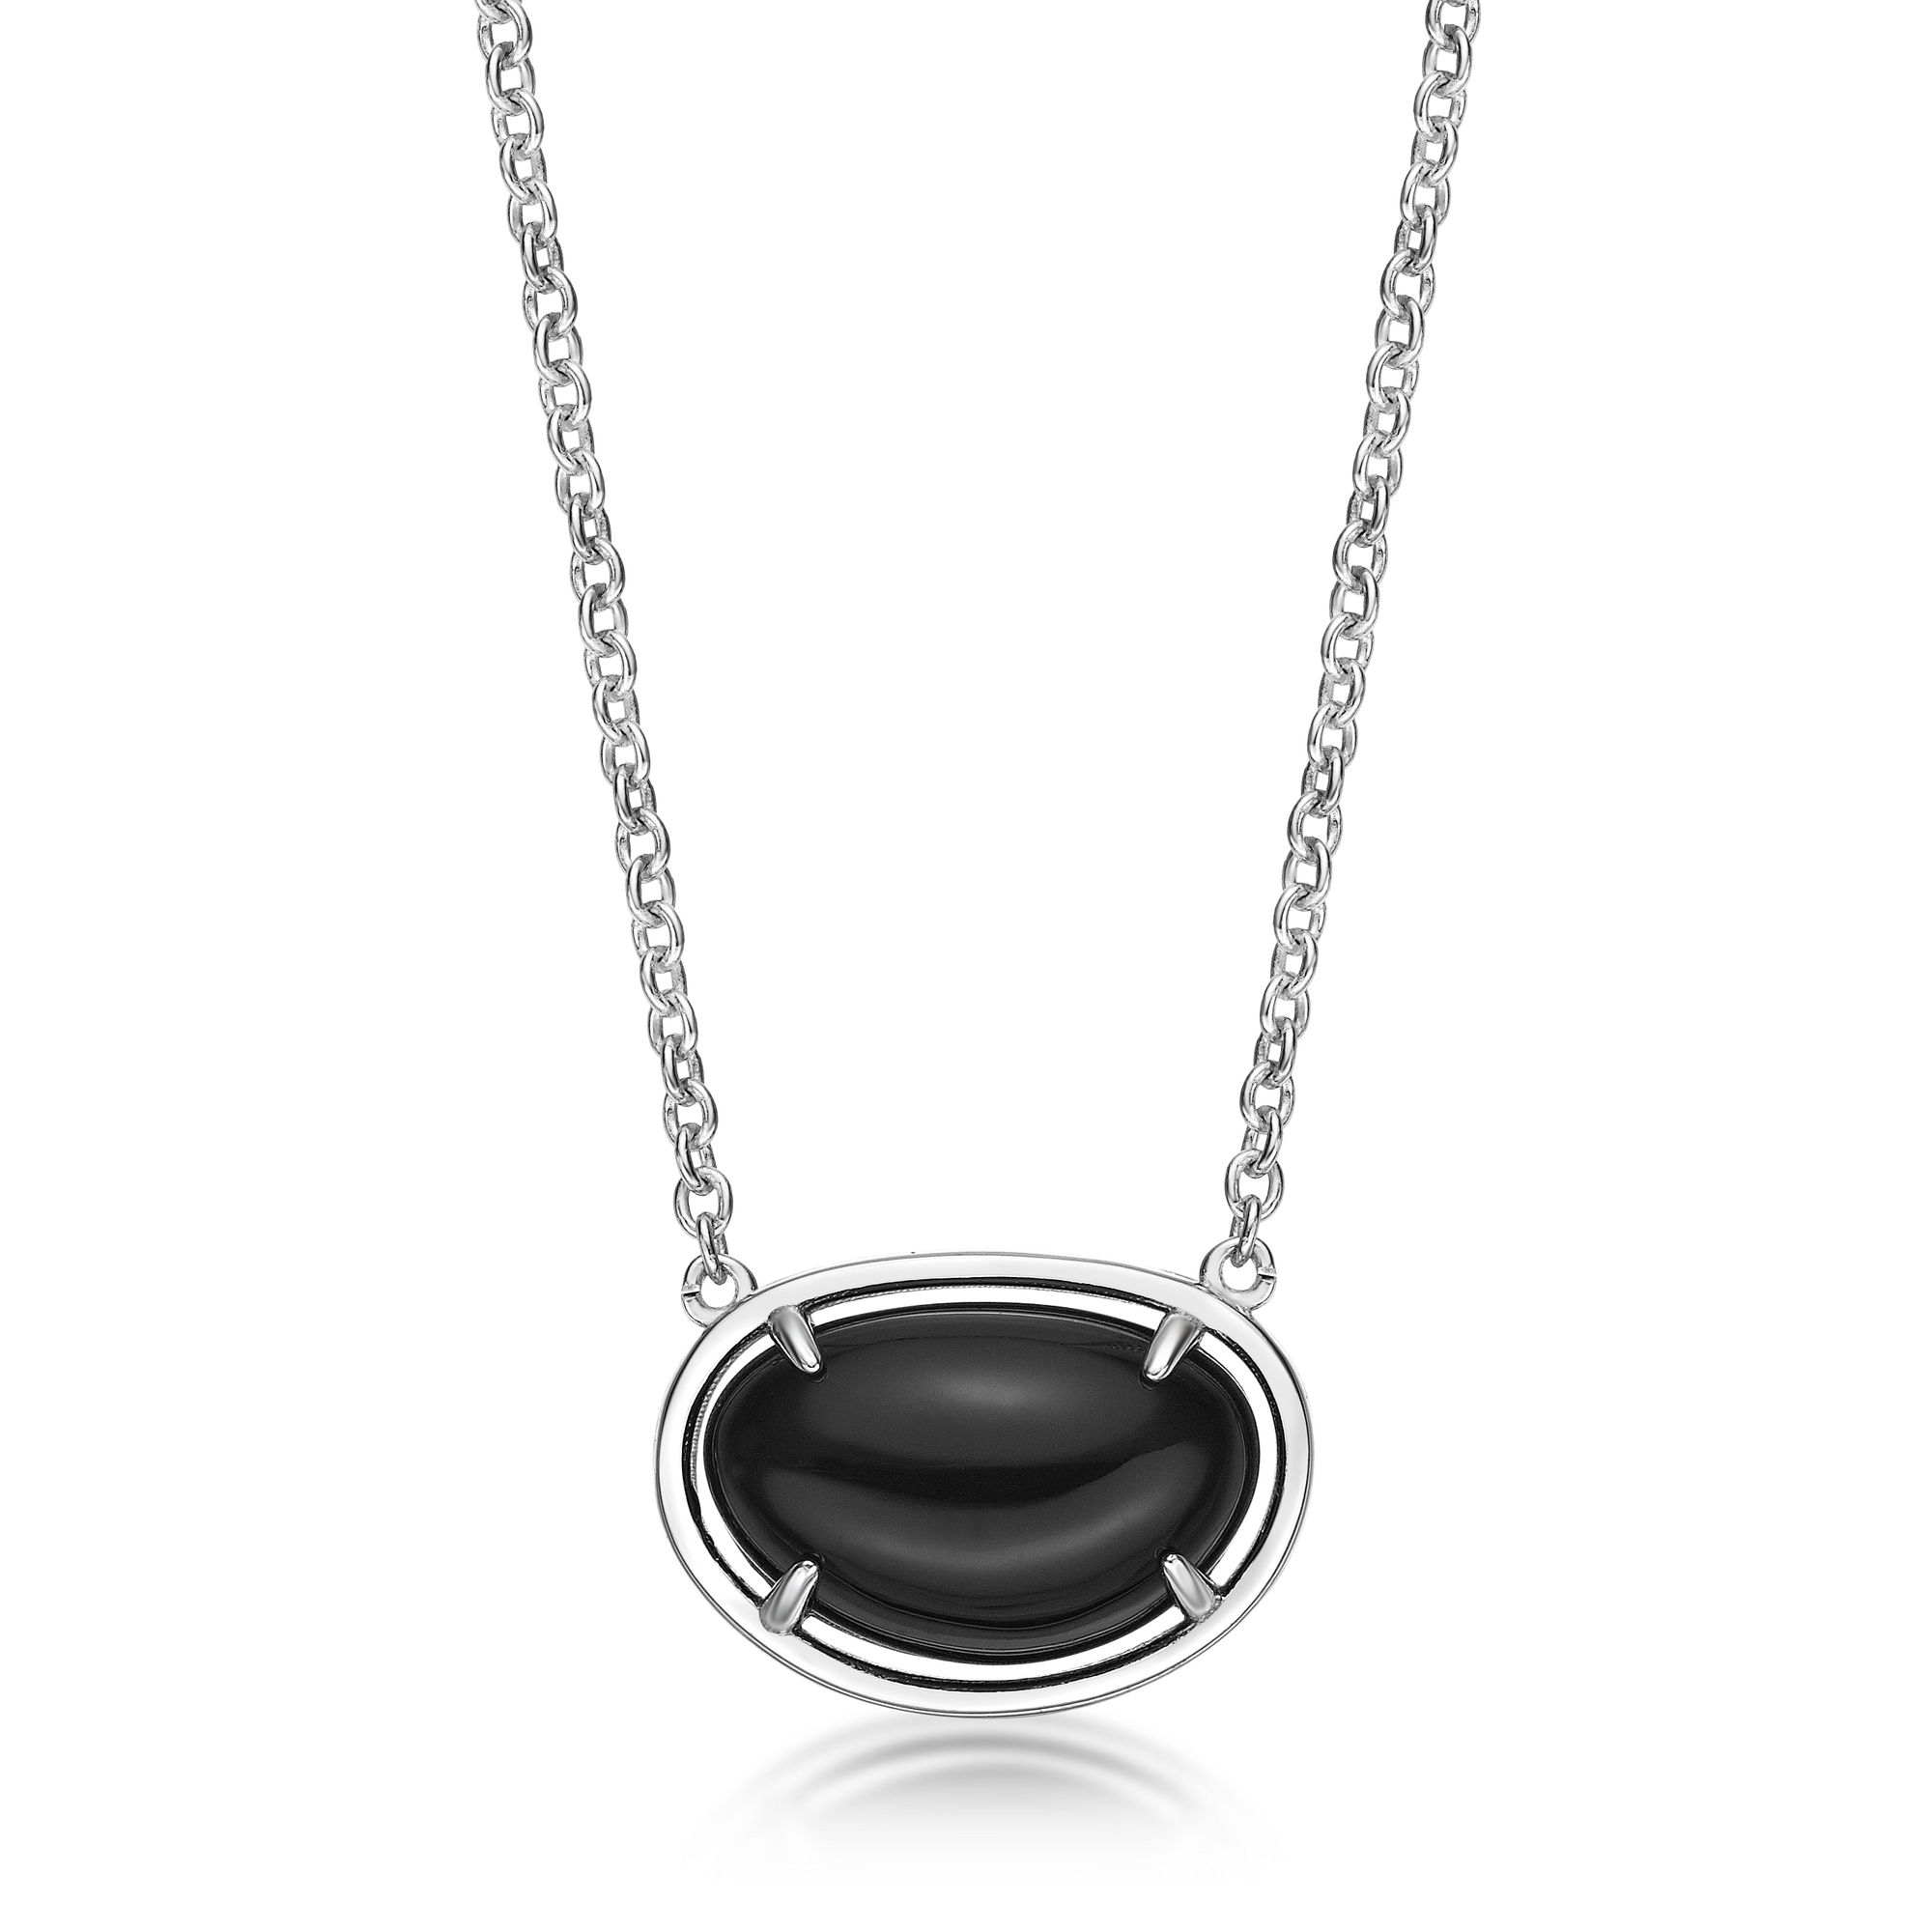 Lavari Jewelers Women's Sterling Silver Black Onyx Oval Charm Pendant with Cubic Zirconia, 18"